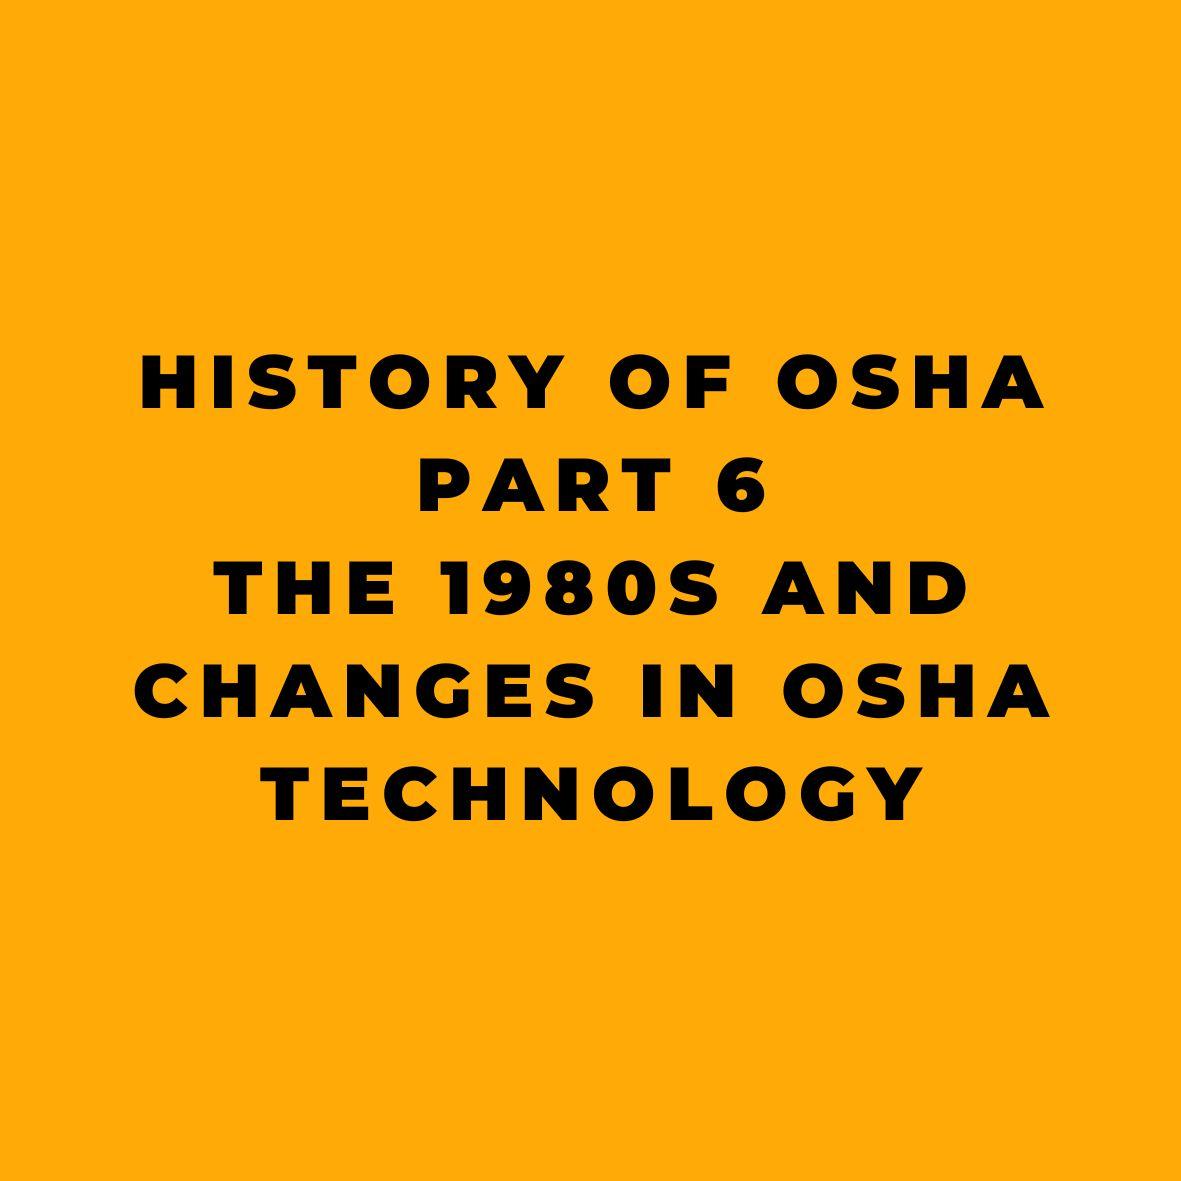 History of OSHA - Part 6 - The 1980s and Changes in OSHA Technology